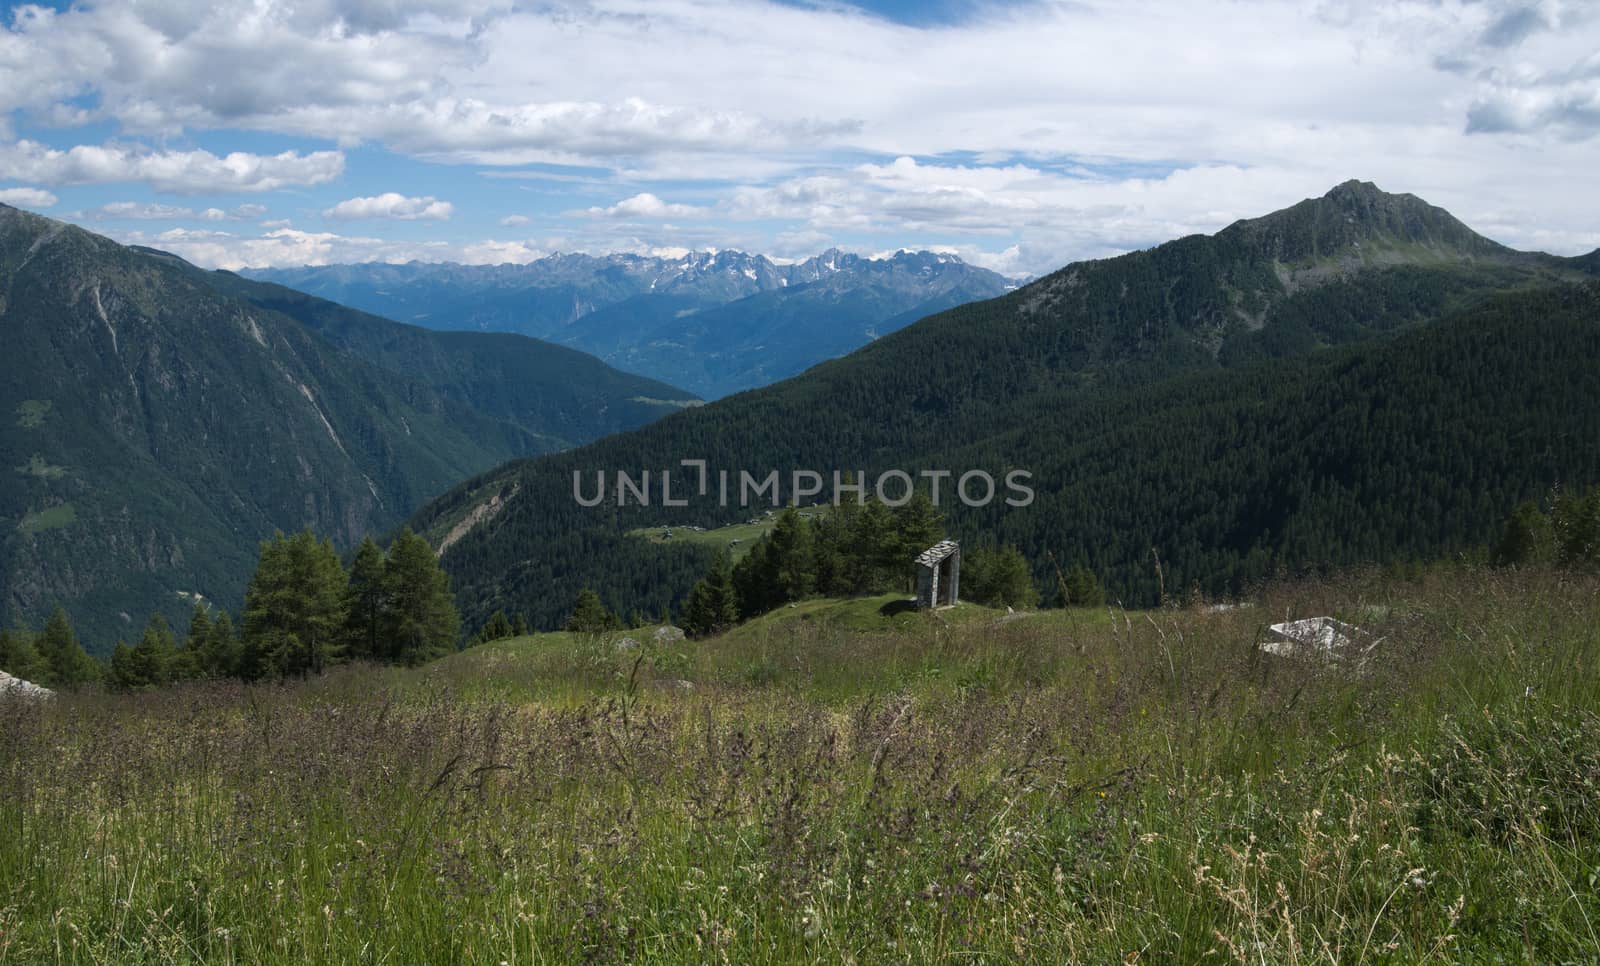 Mountains landscape in spring in Valtellina, northern Italy
